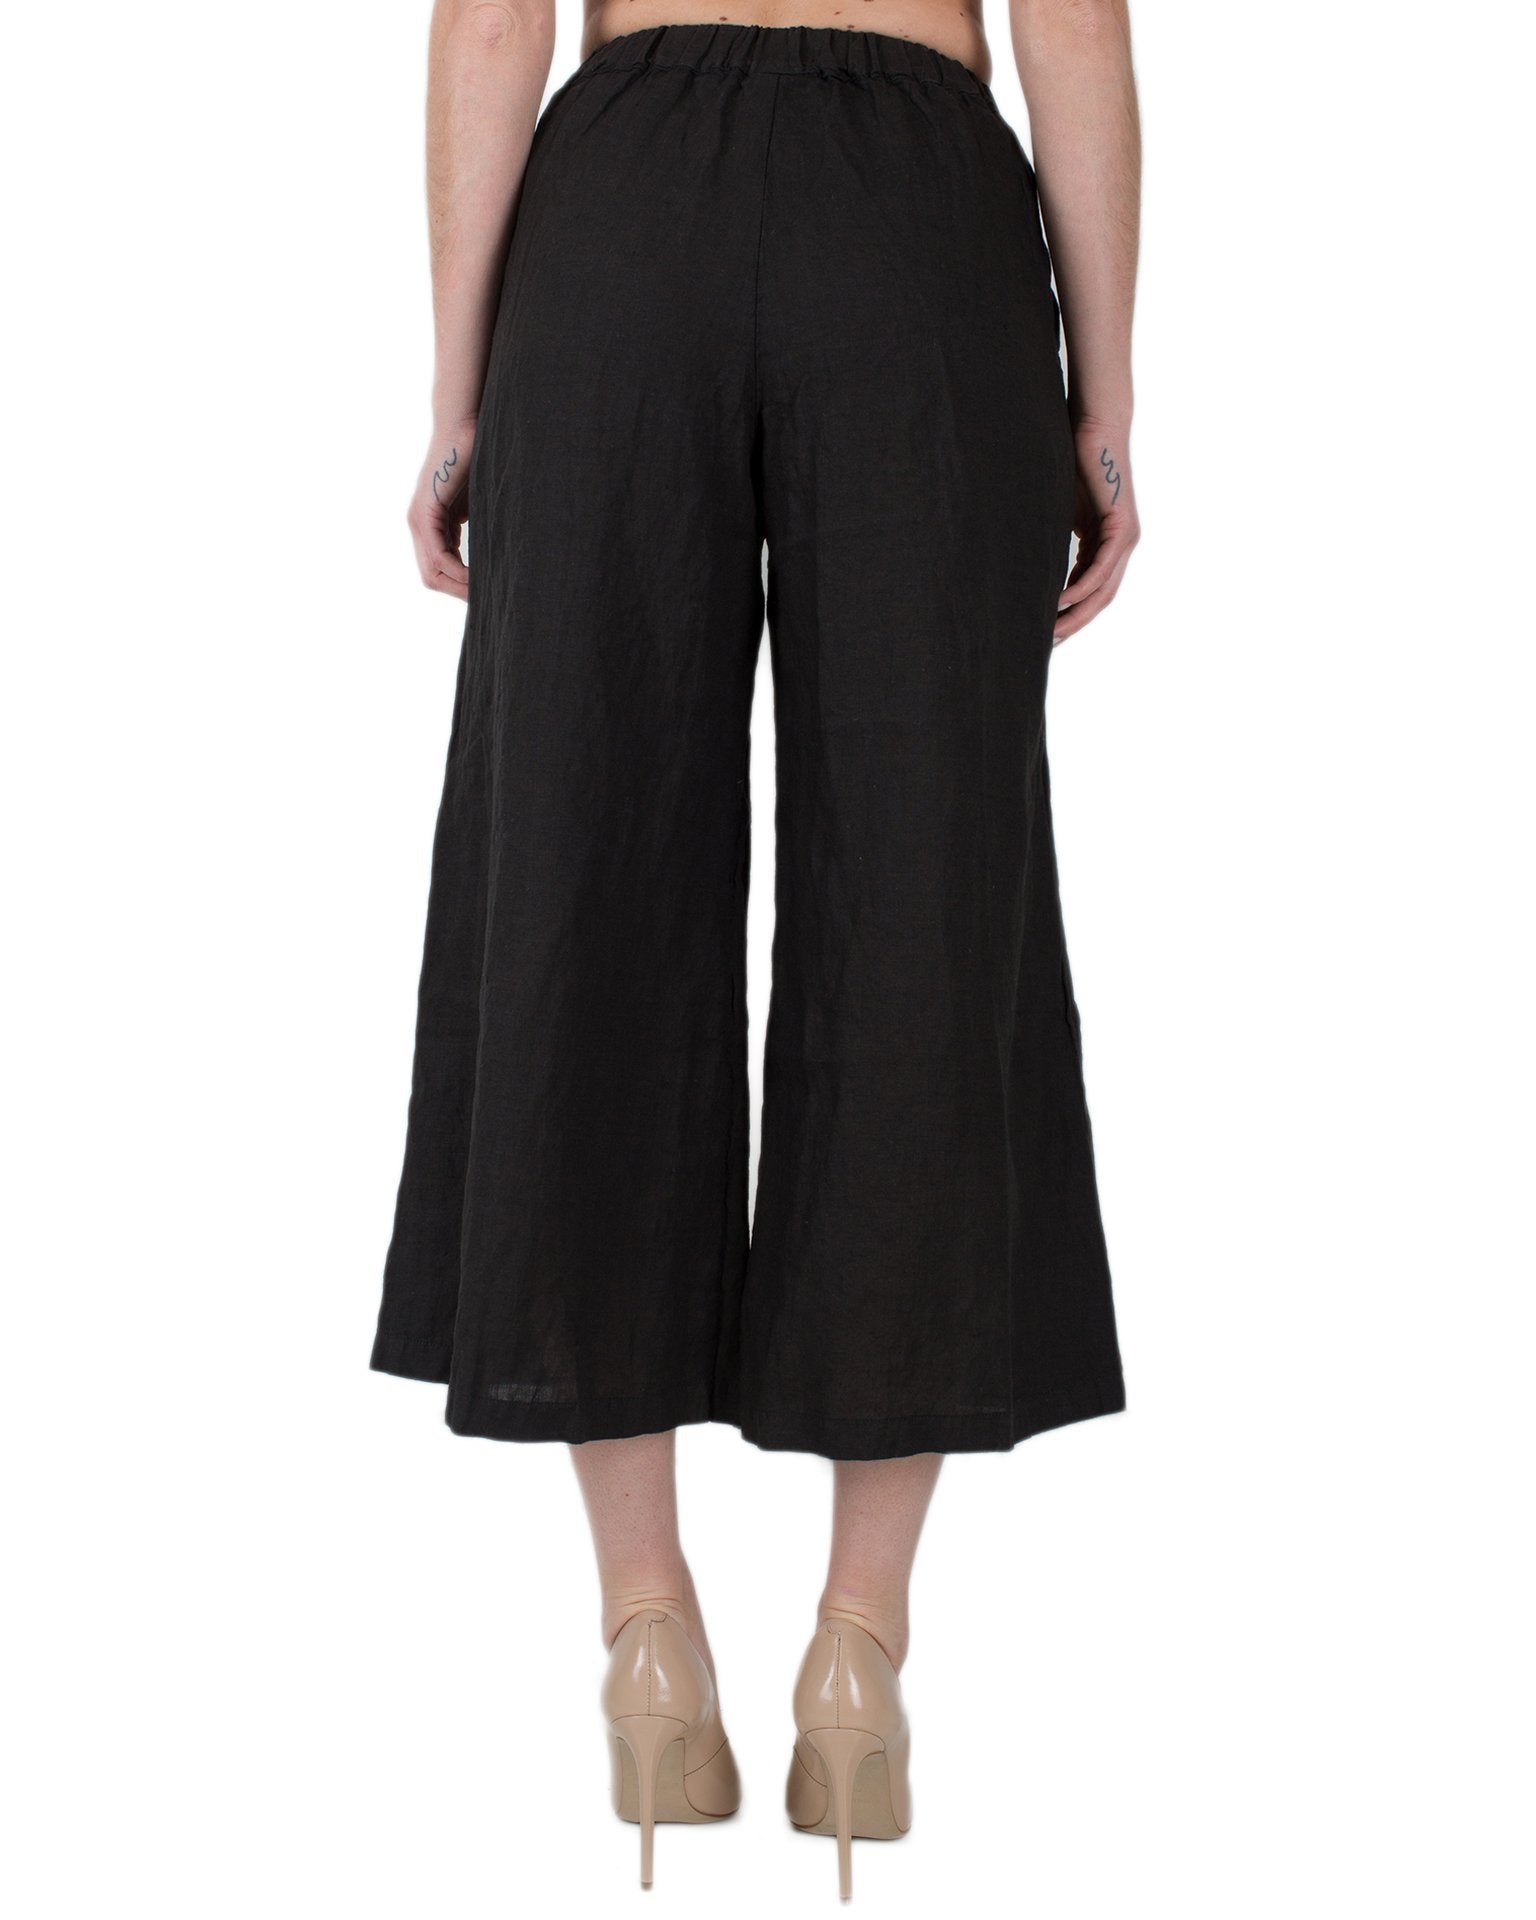 Cropped Wendy Pant in Black Linen